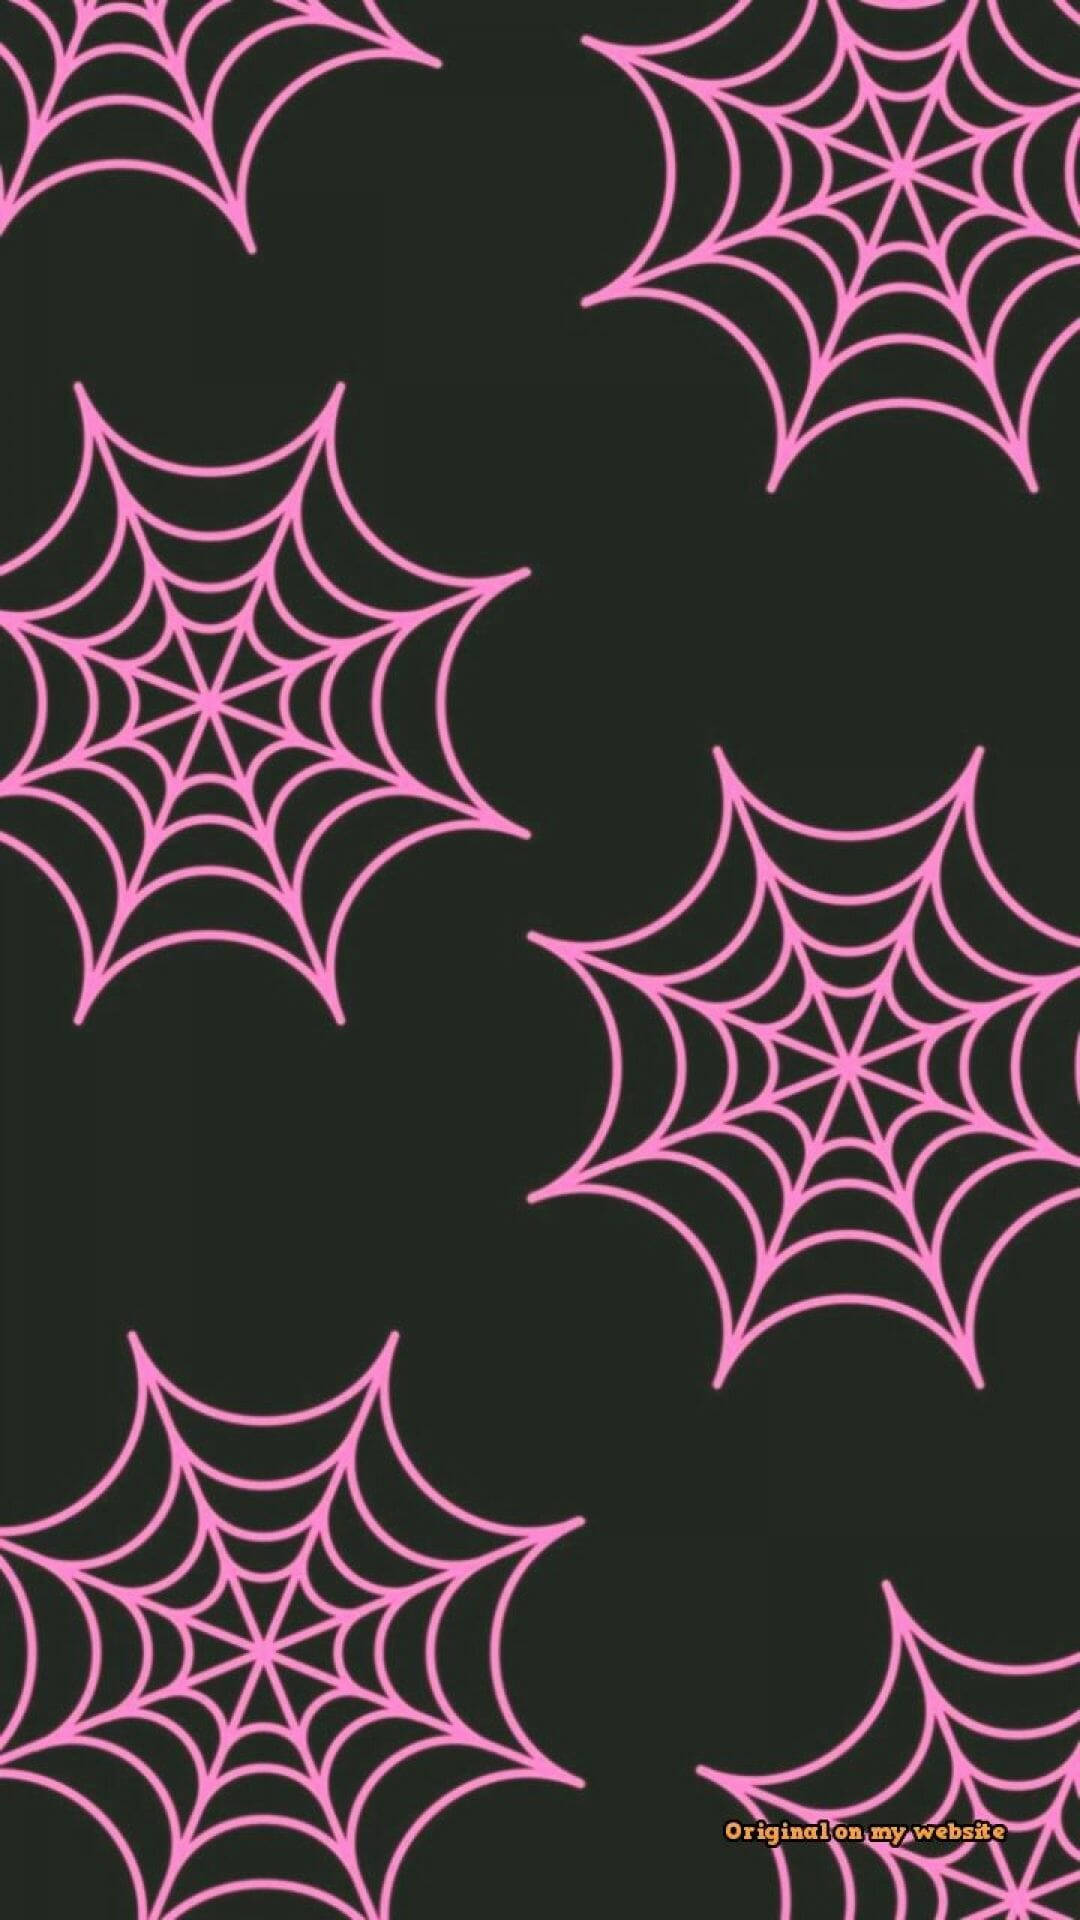 Spider Web Fabric, Wallpaper and Home Decor | Spoonflower